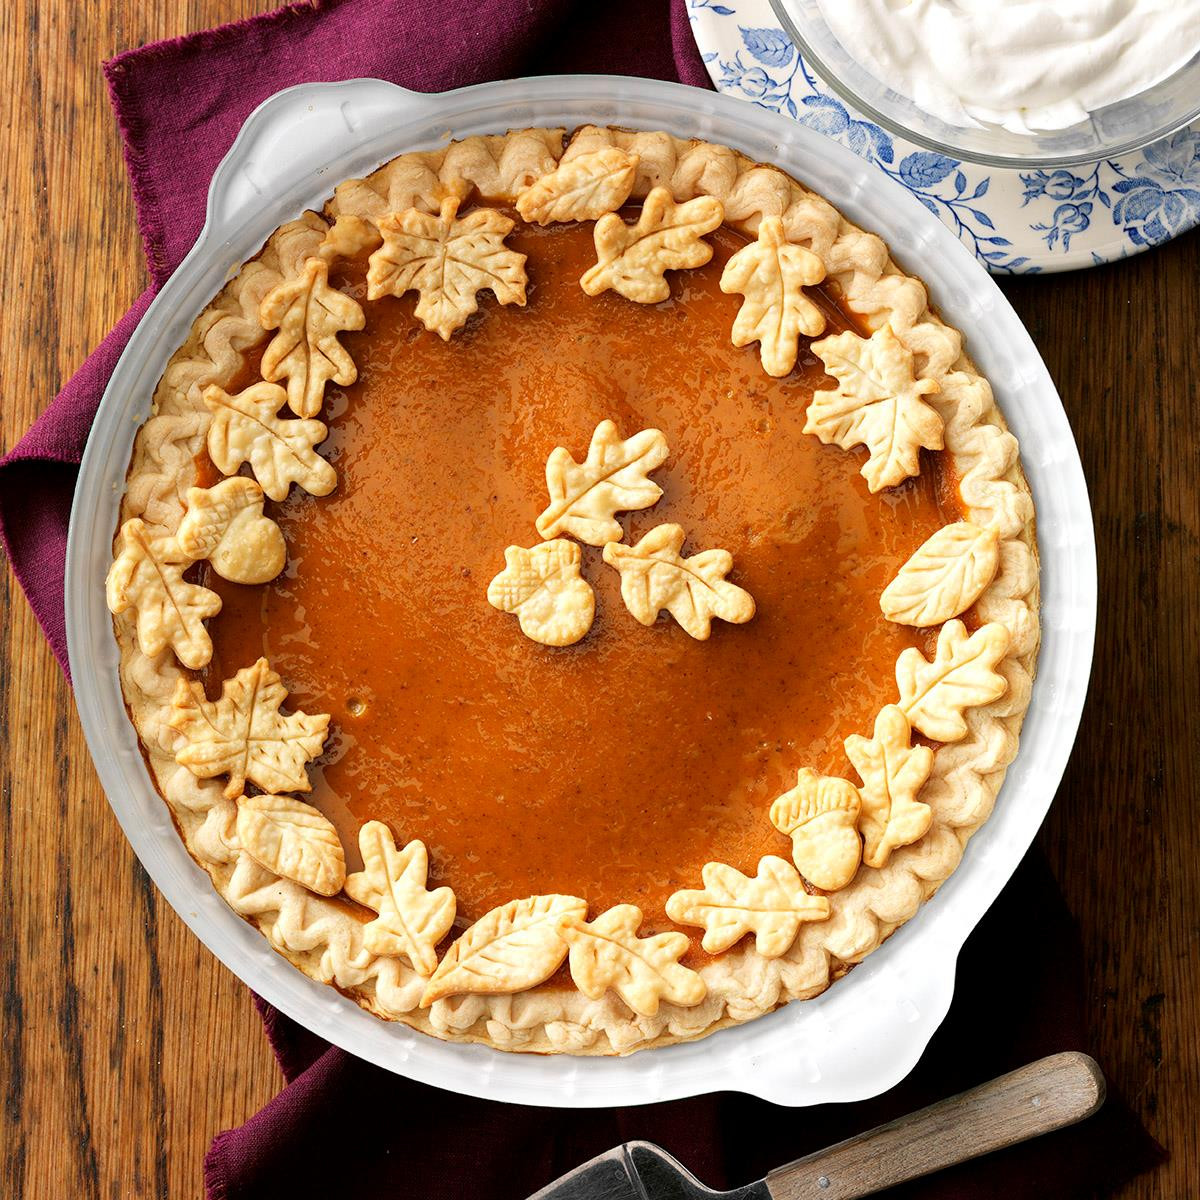 Pies To Make For Thanksgiving
 25 Pumpkin Pie Recipes to Try This Year